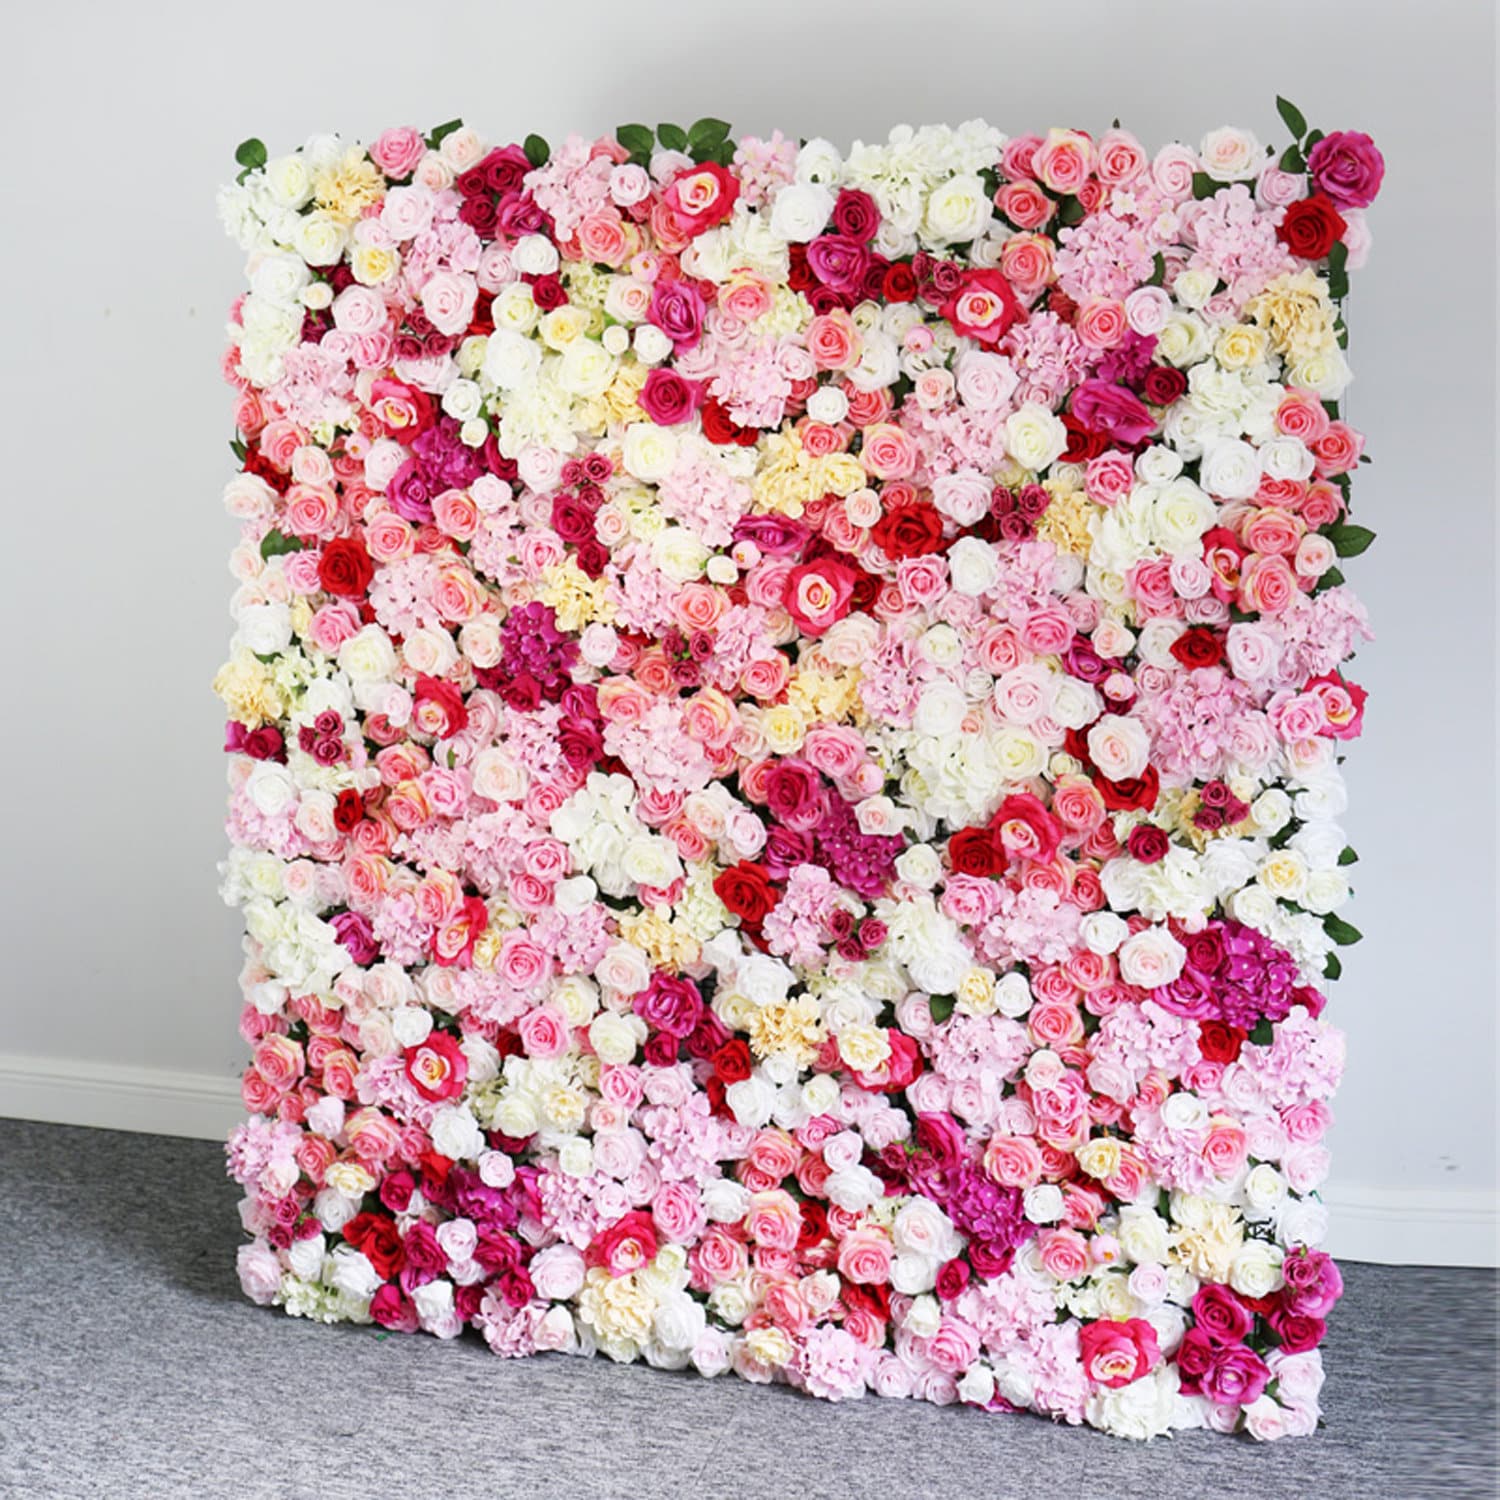 Artificial Simulation Flower Wall Floral Backdrops For Romantic Photography Bridal Shower Baby Shower Special Event Arrangement Panel40x60cm